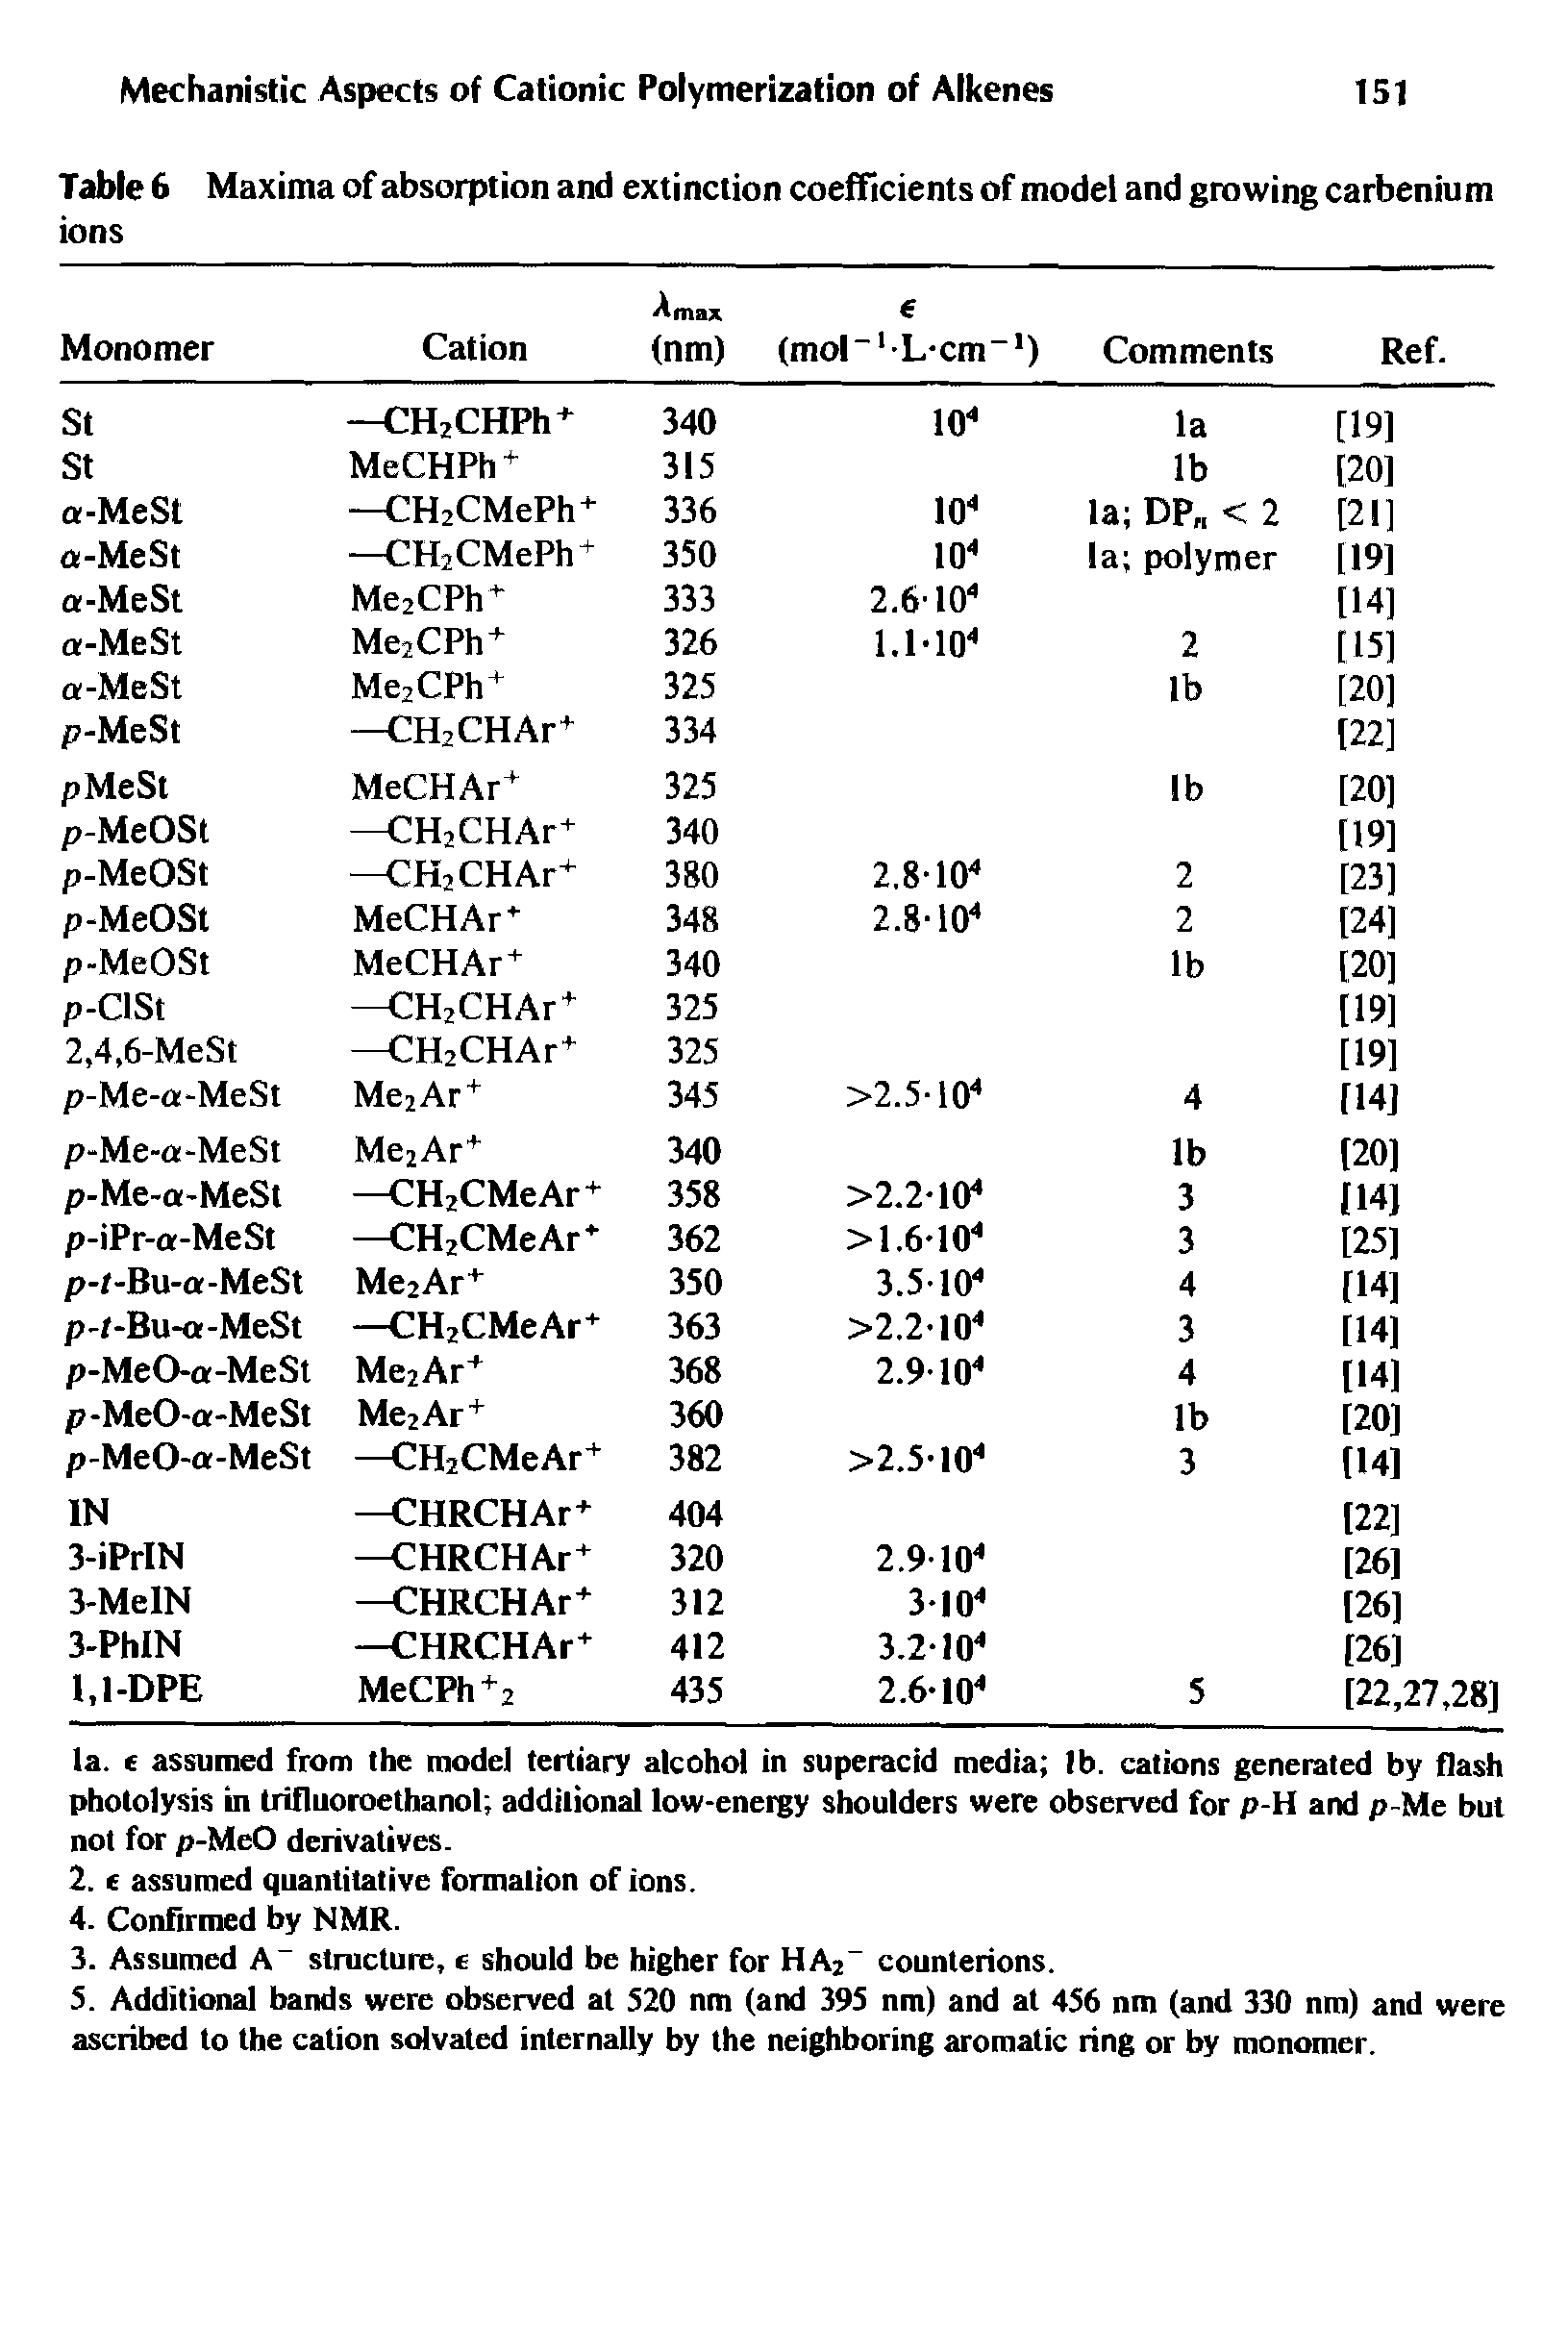 Table 6 Maxima of absorption and extinction coefficients of model and growing carbenium ions...